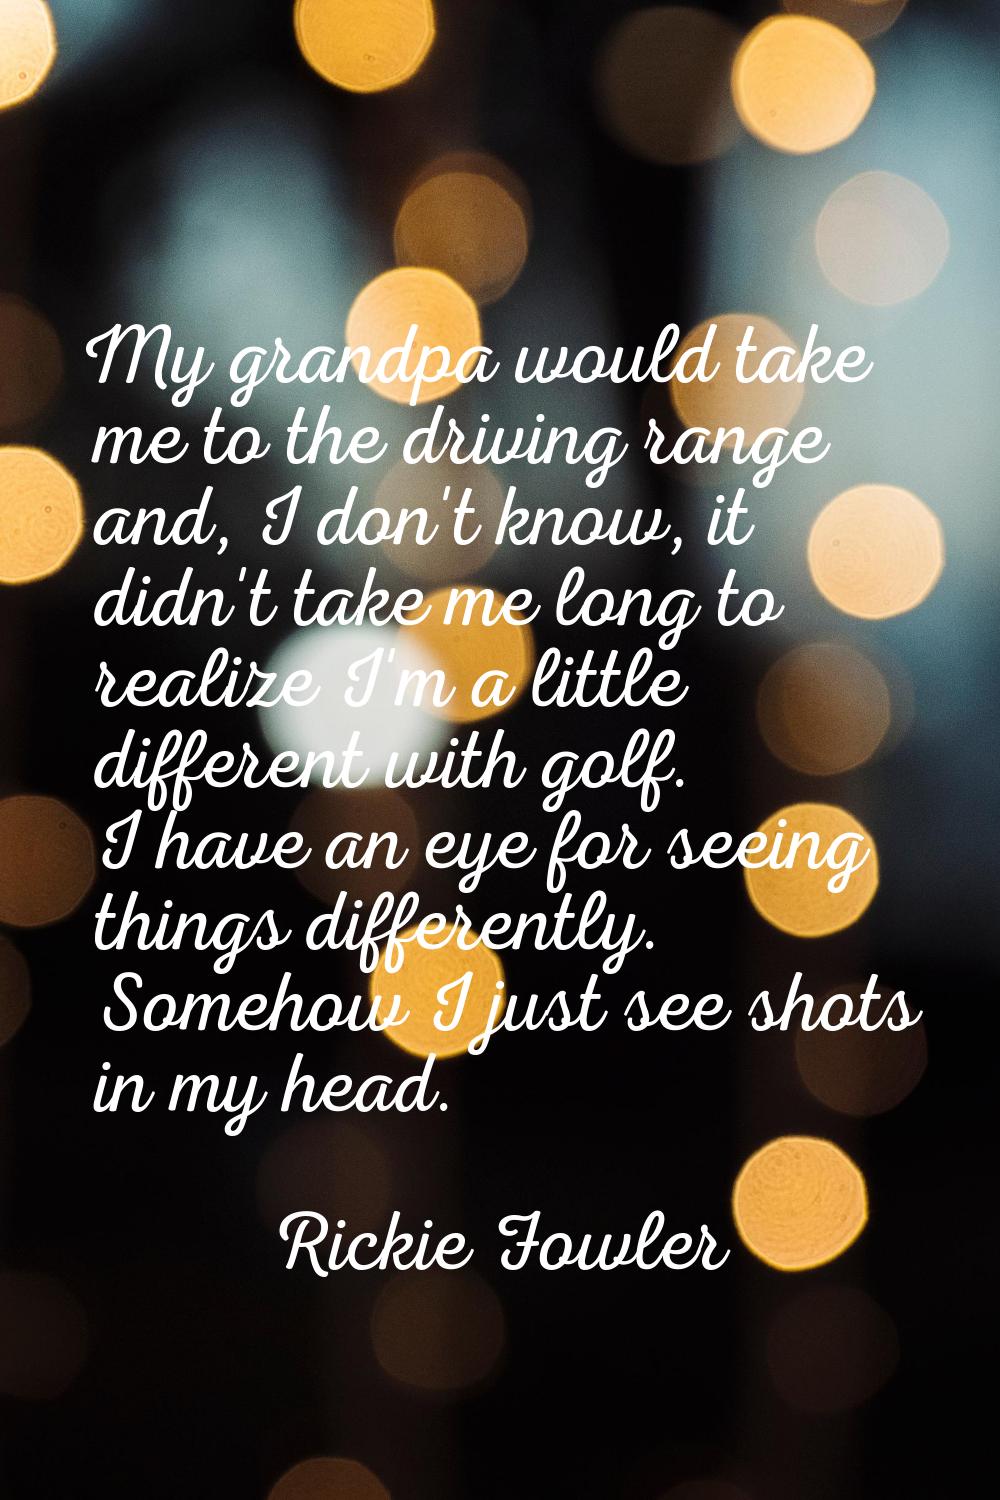 My grandpa would take me to the driving range and, I don't know, it didn't take me long to realize 